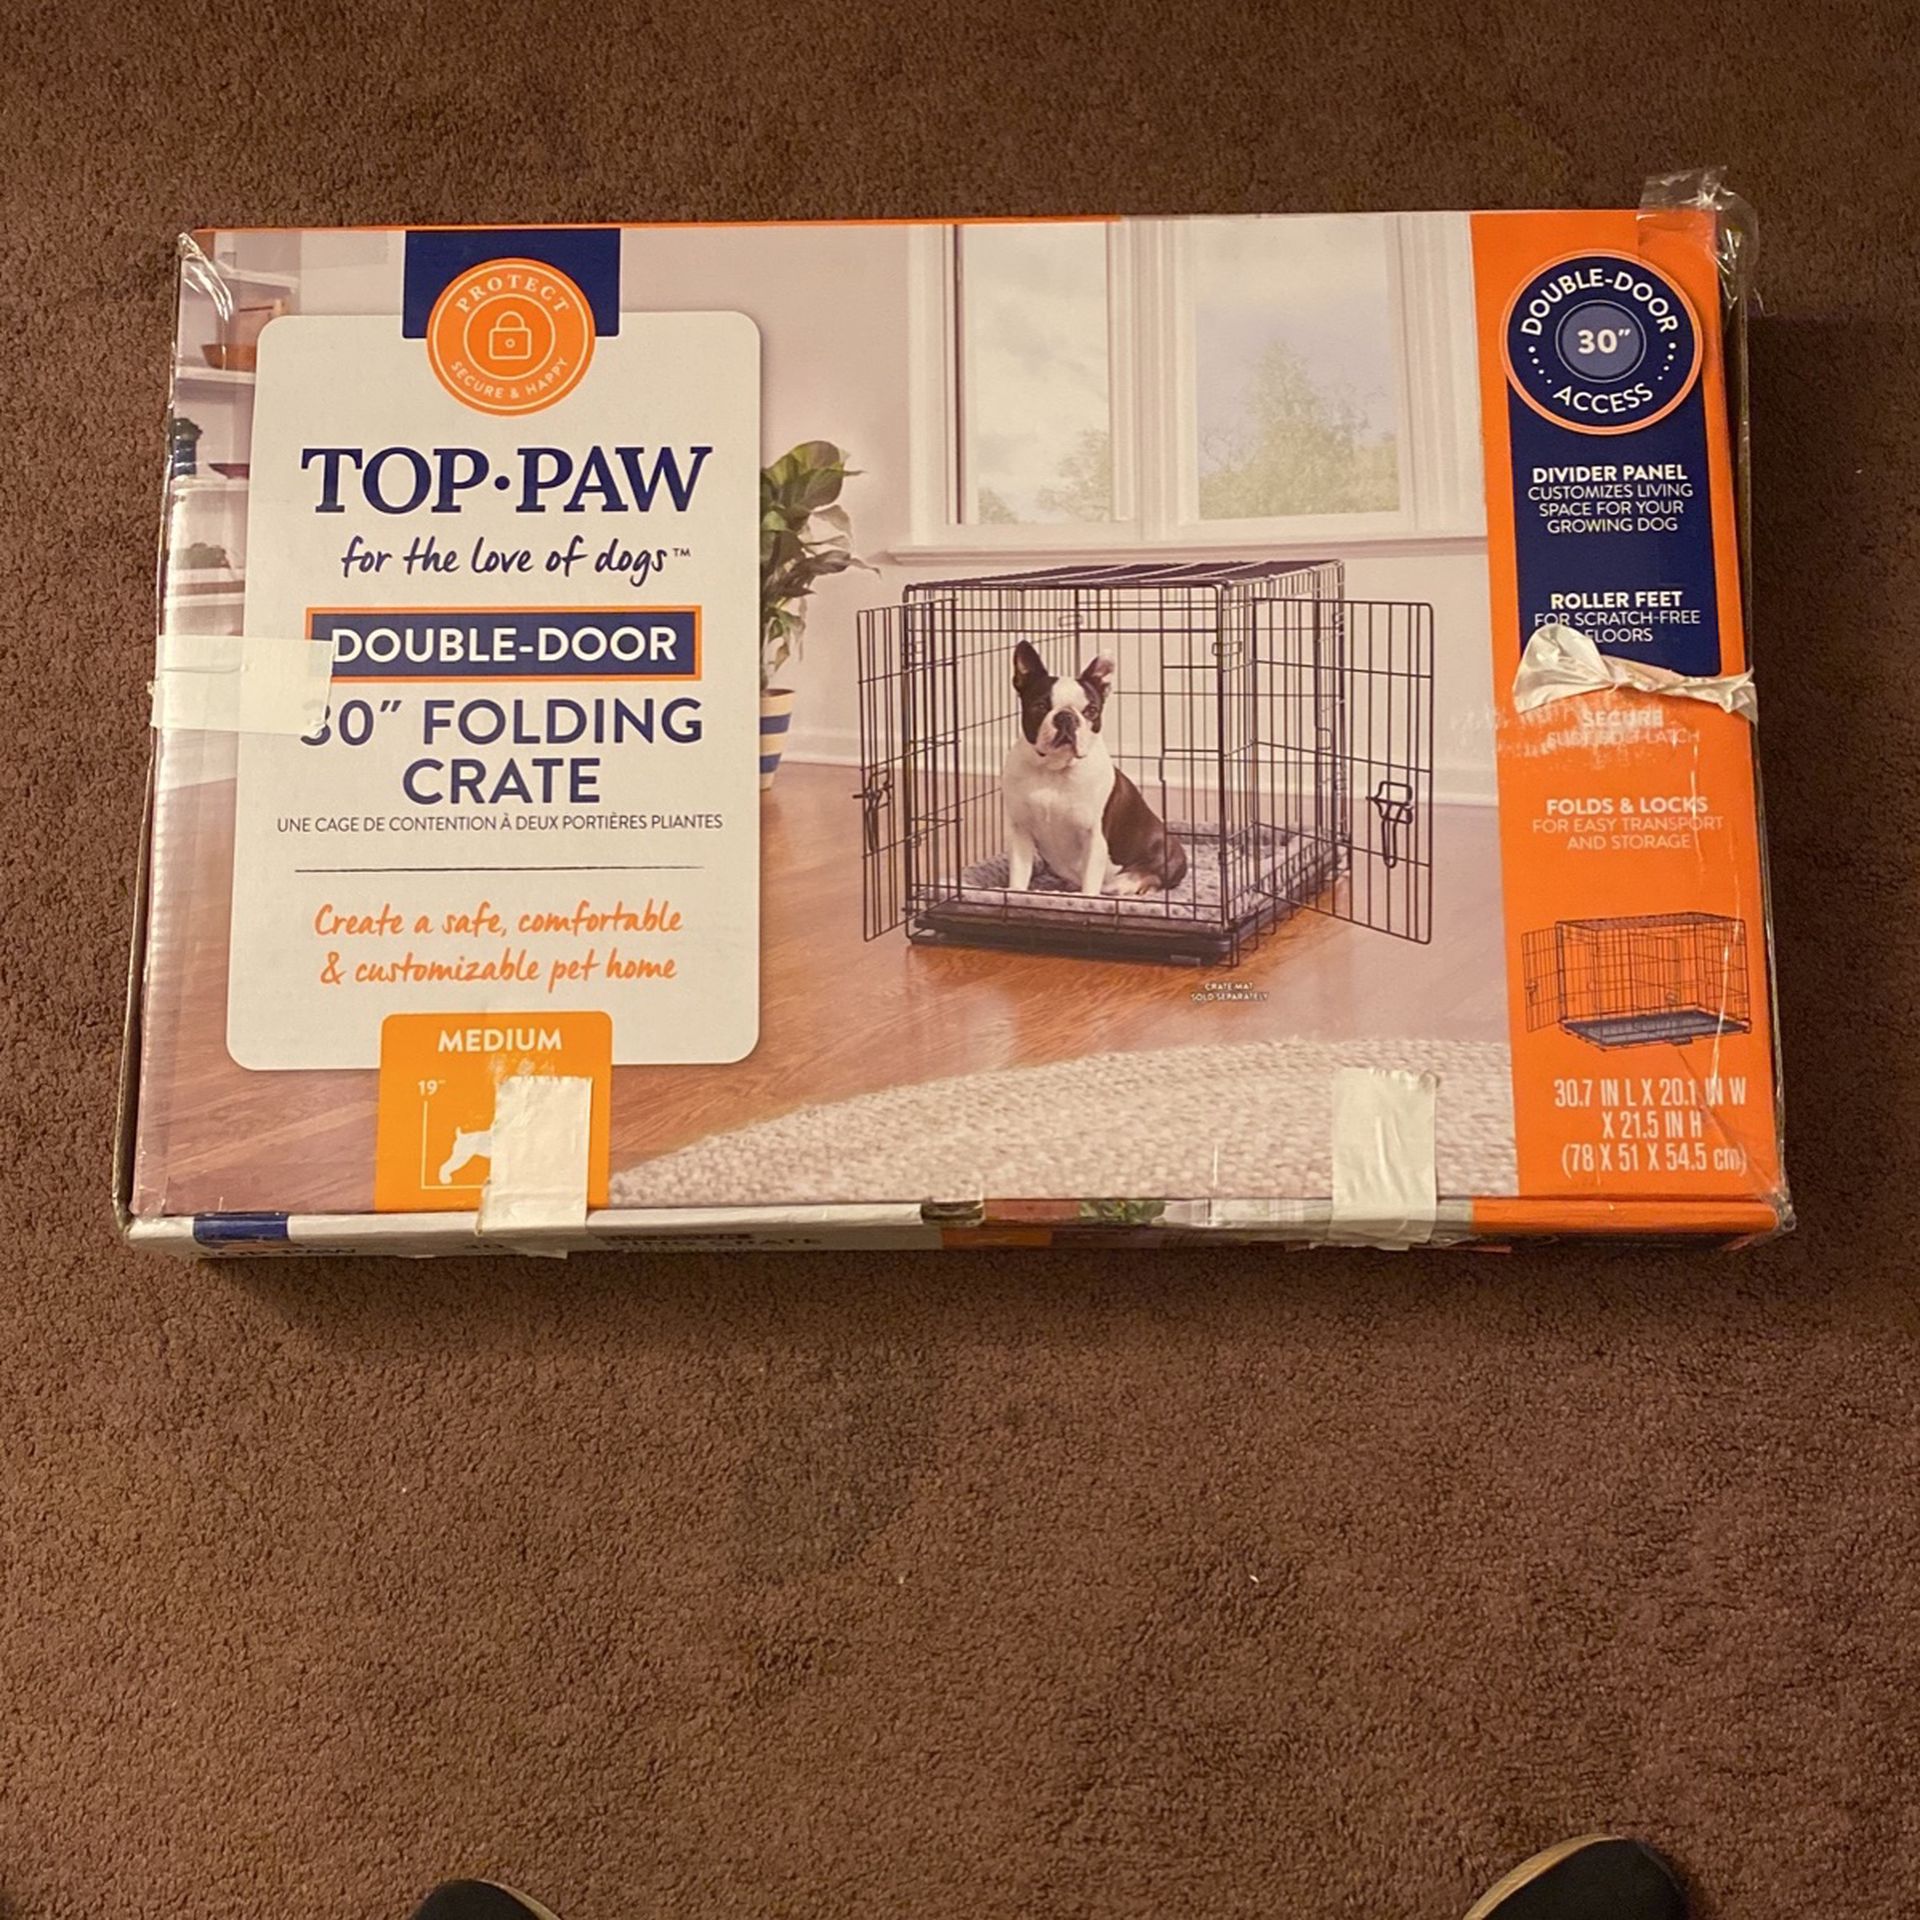 Dog Crate/cage